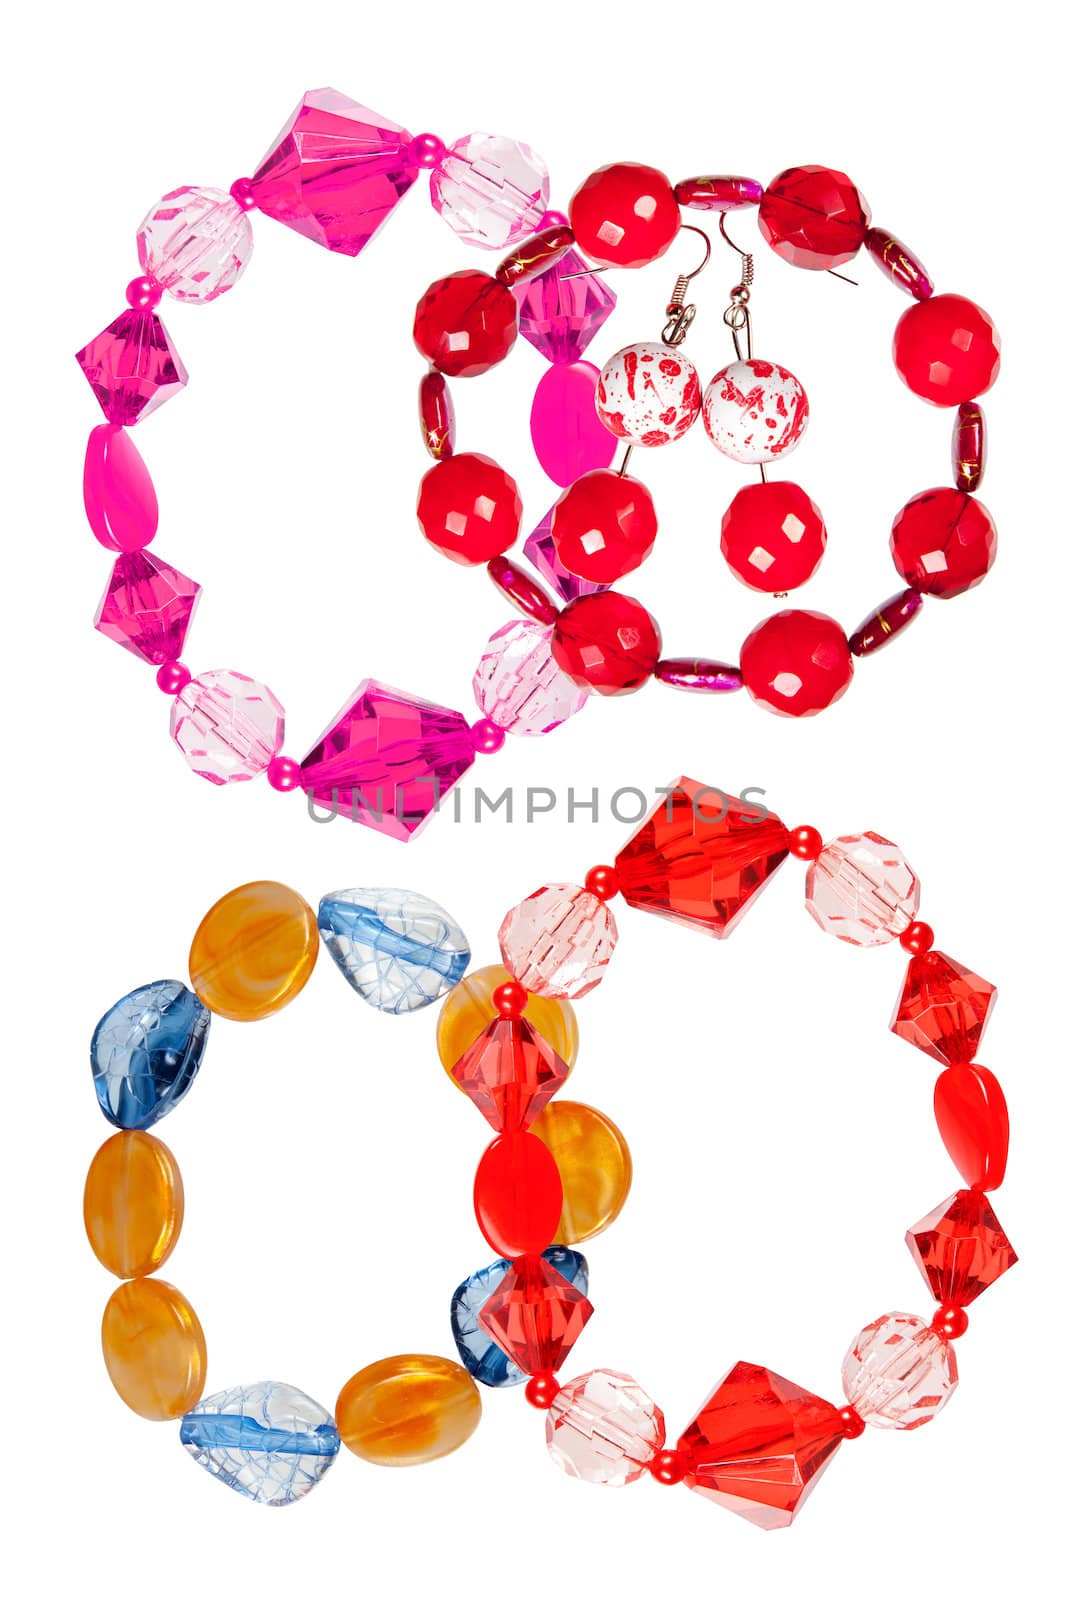 A set of handmade bracelets made of glass, isolated on a white background. Collage